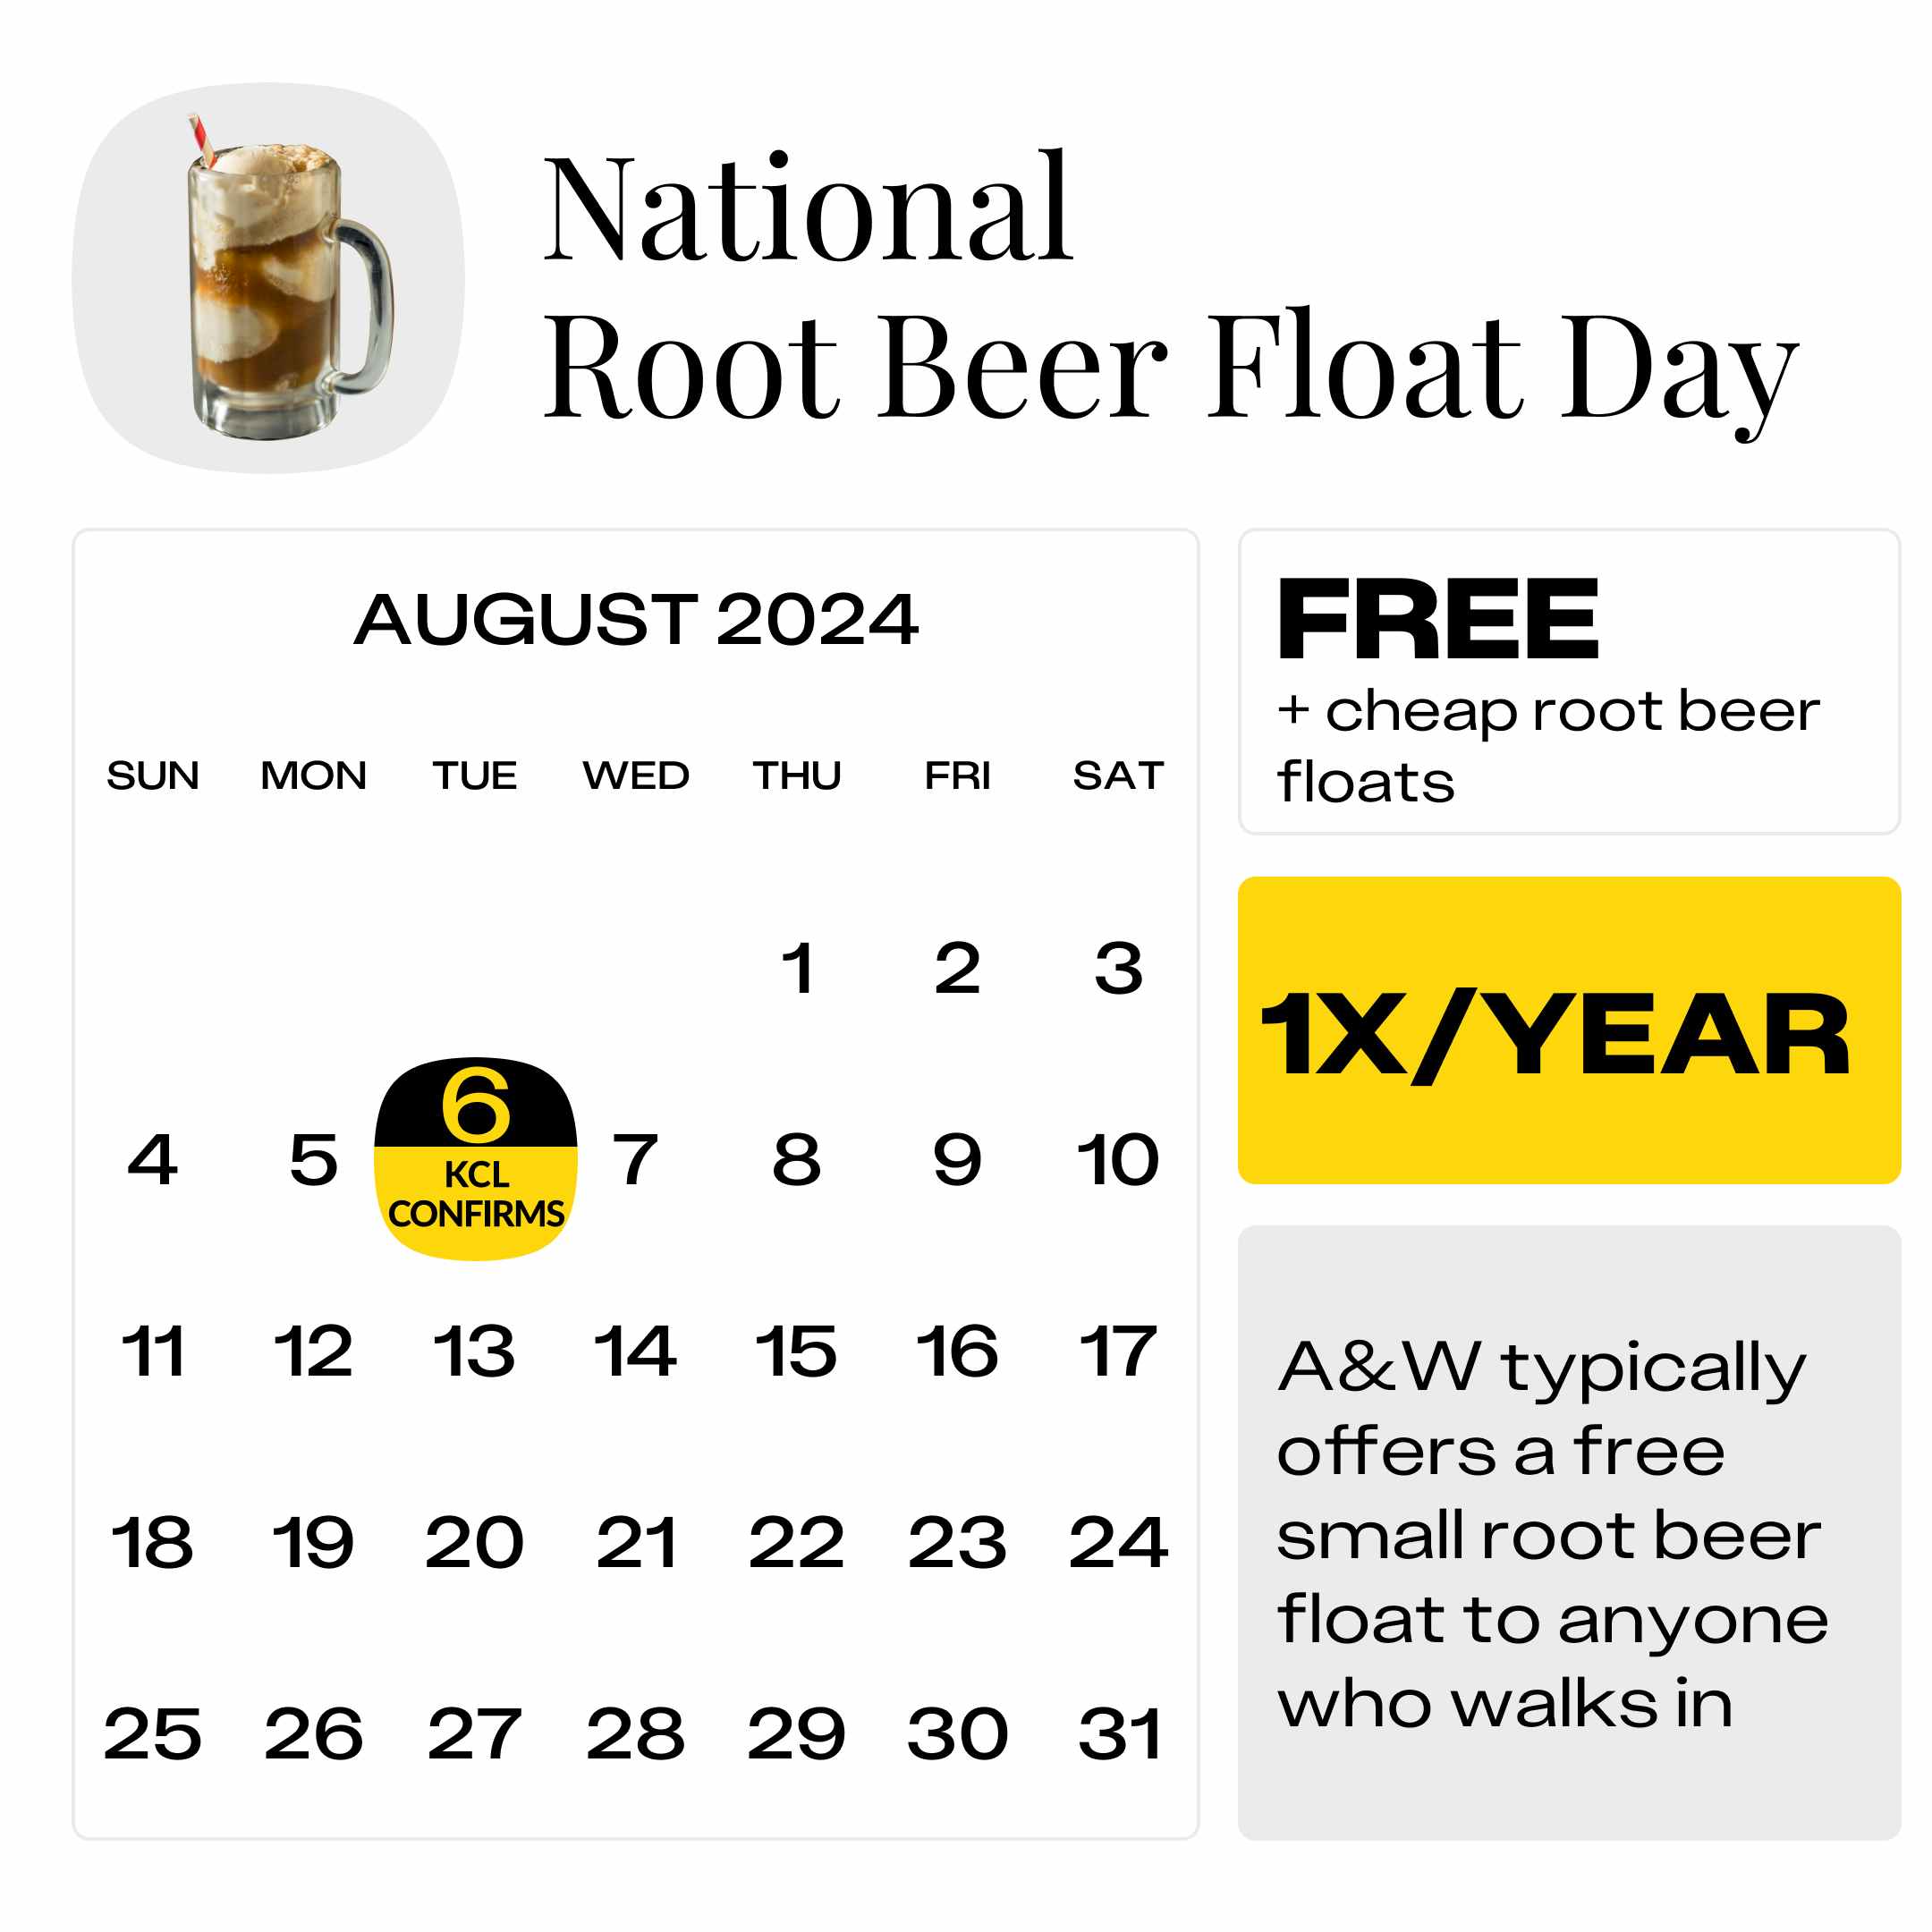 National-Root-Beer-Float-Day-2024-retail-event-calendar-kcl